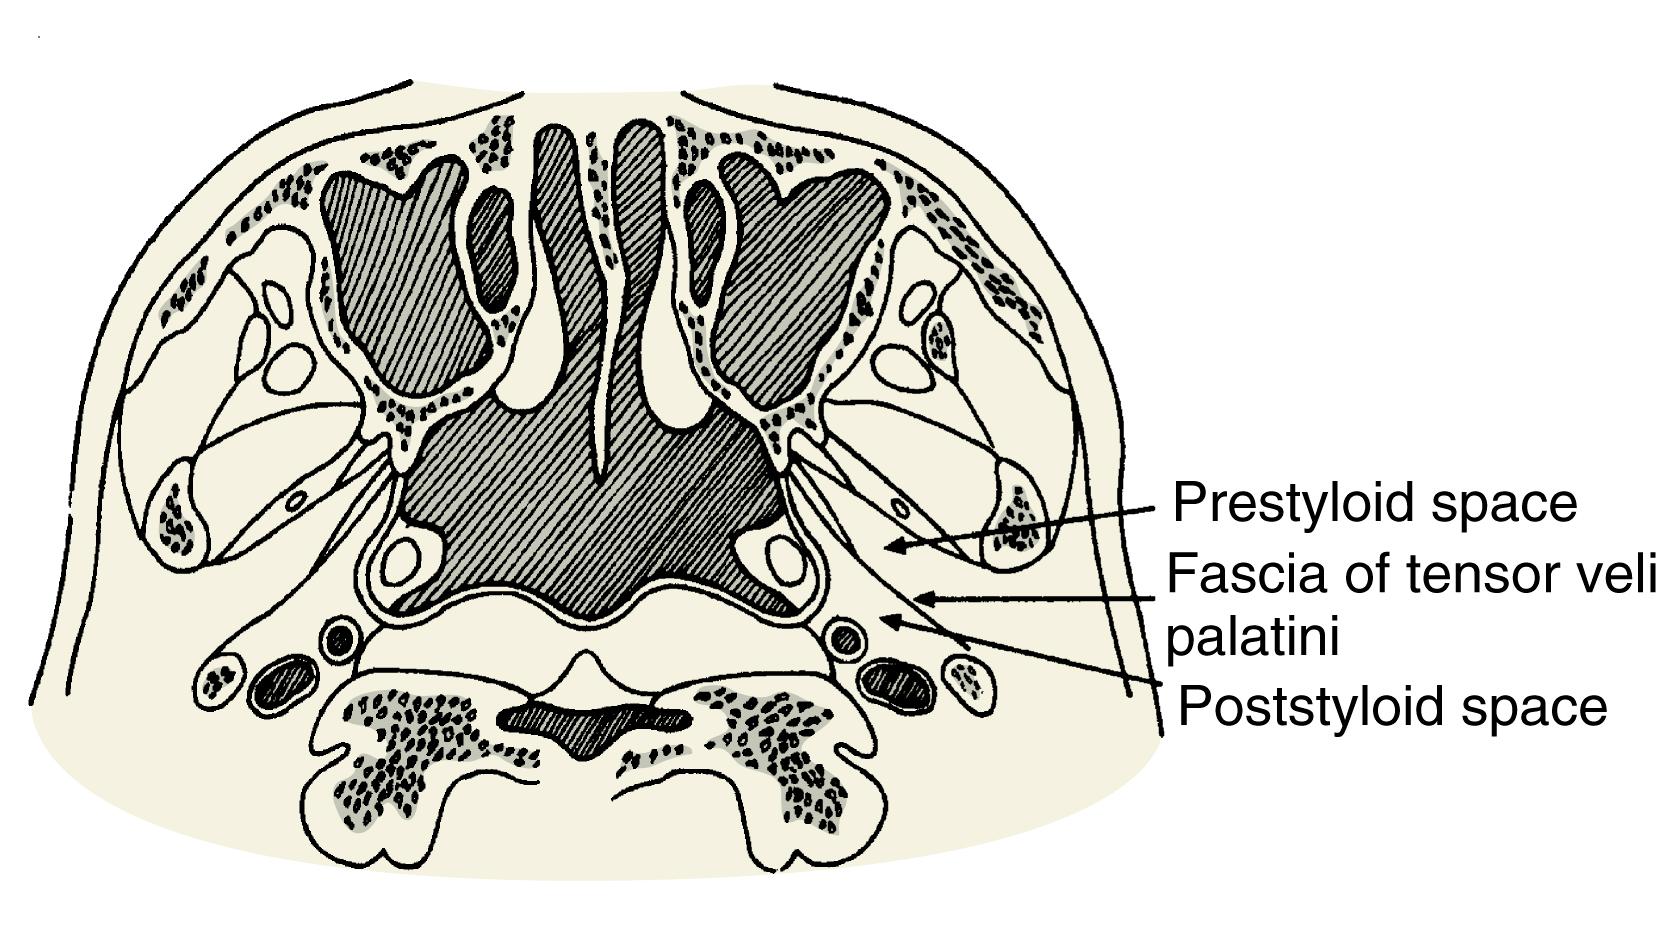 Fig. 69.2, The fascia of the tensor veli palatini muscle divides the parapharyngeal space into a prestyloid and a poststyloid compartment.